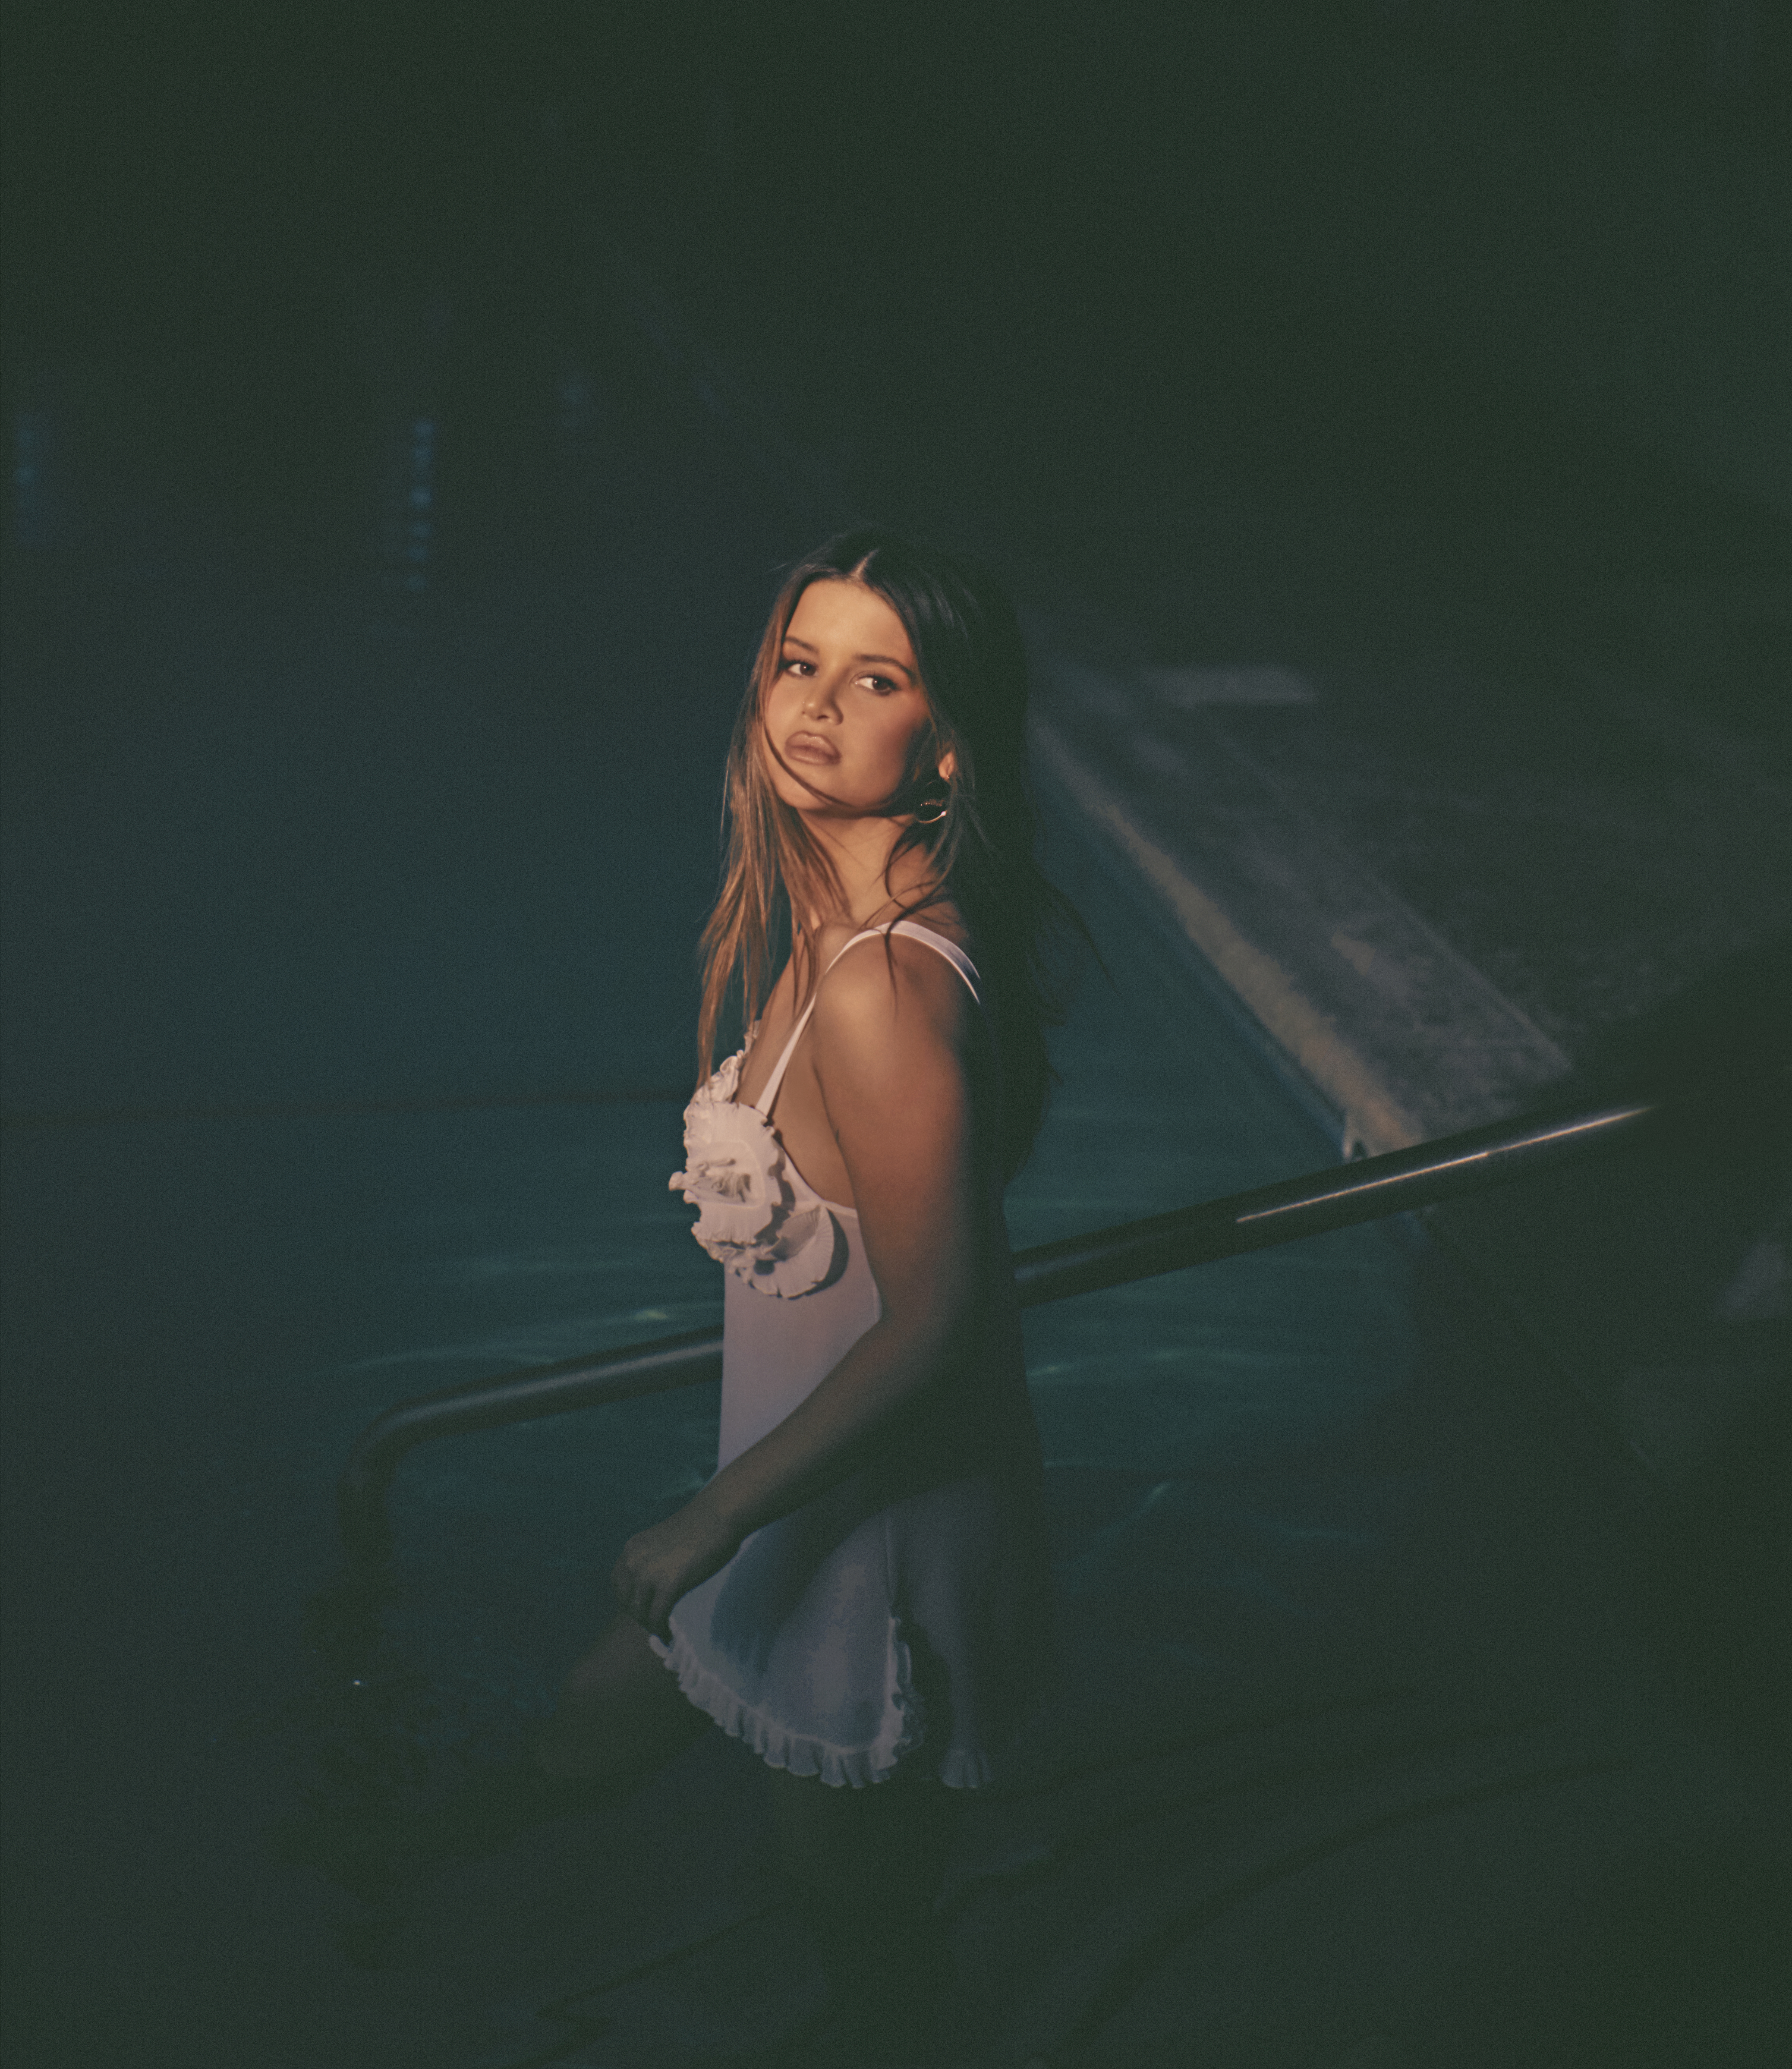 Maren Morris, wearing a white dress, descends into a swimming pool